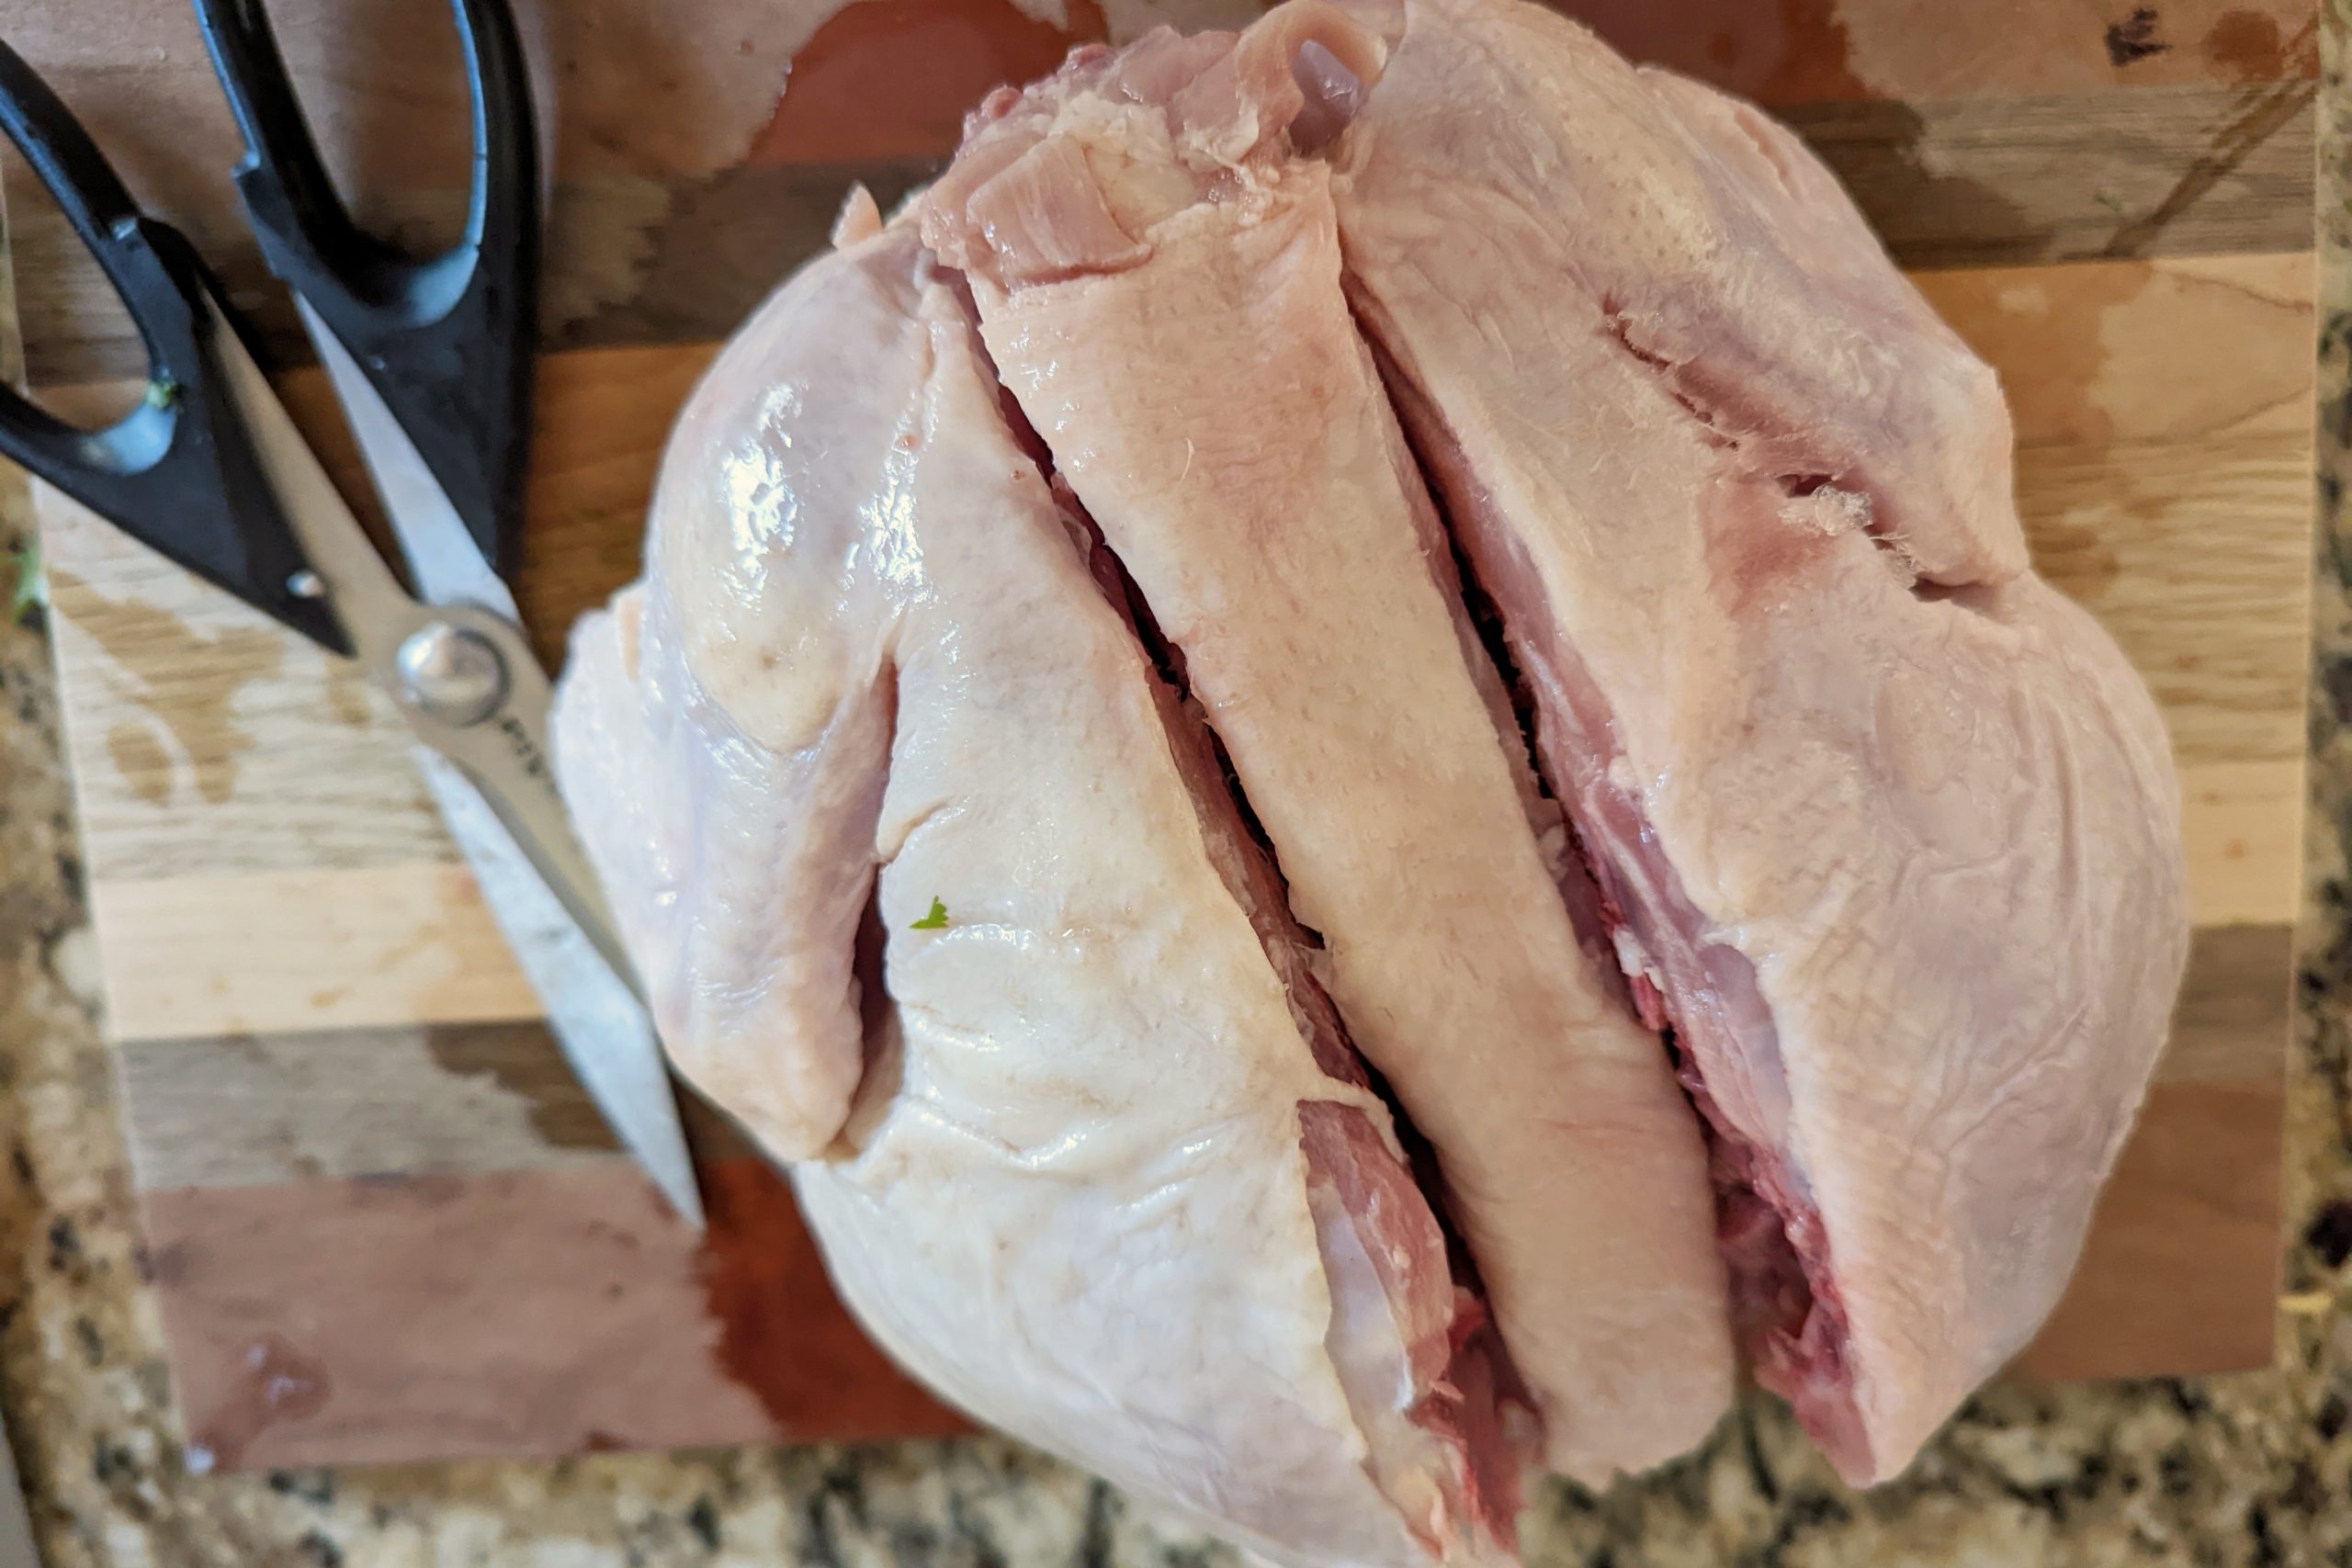 Two slits up the spine of the whole raw chicken. 